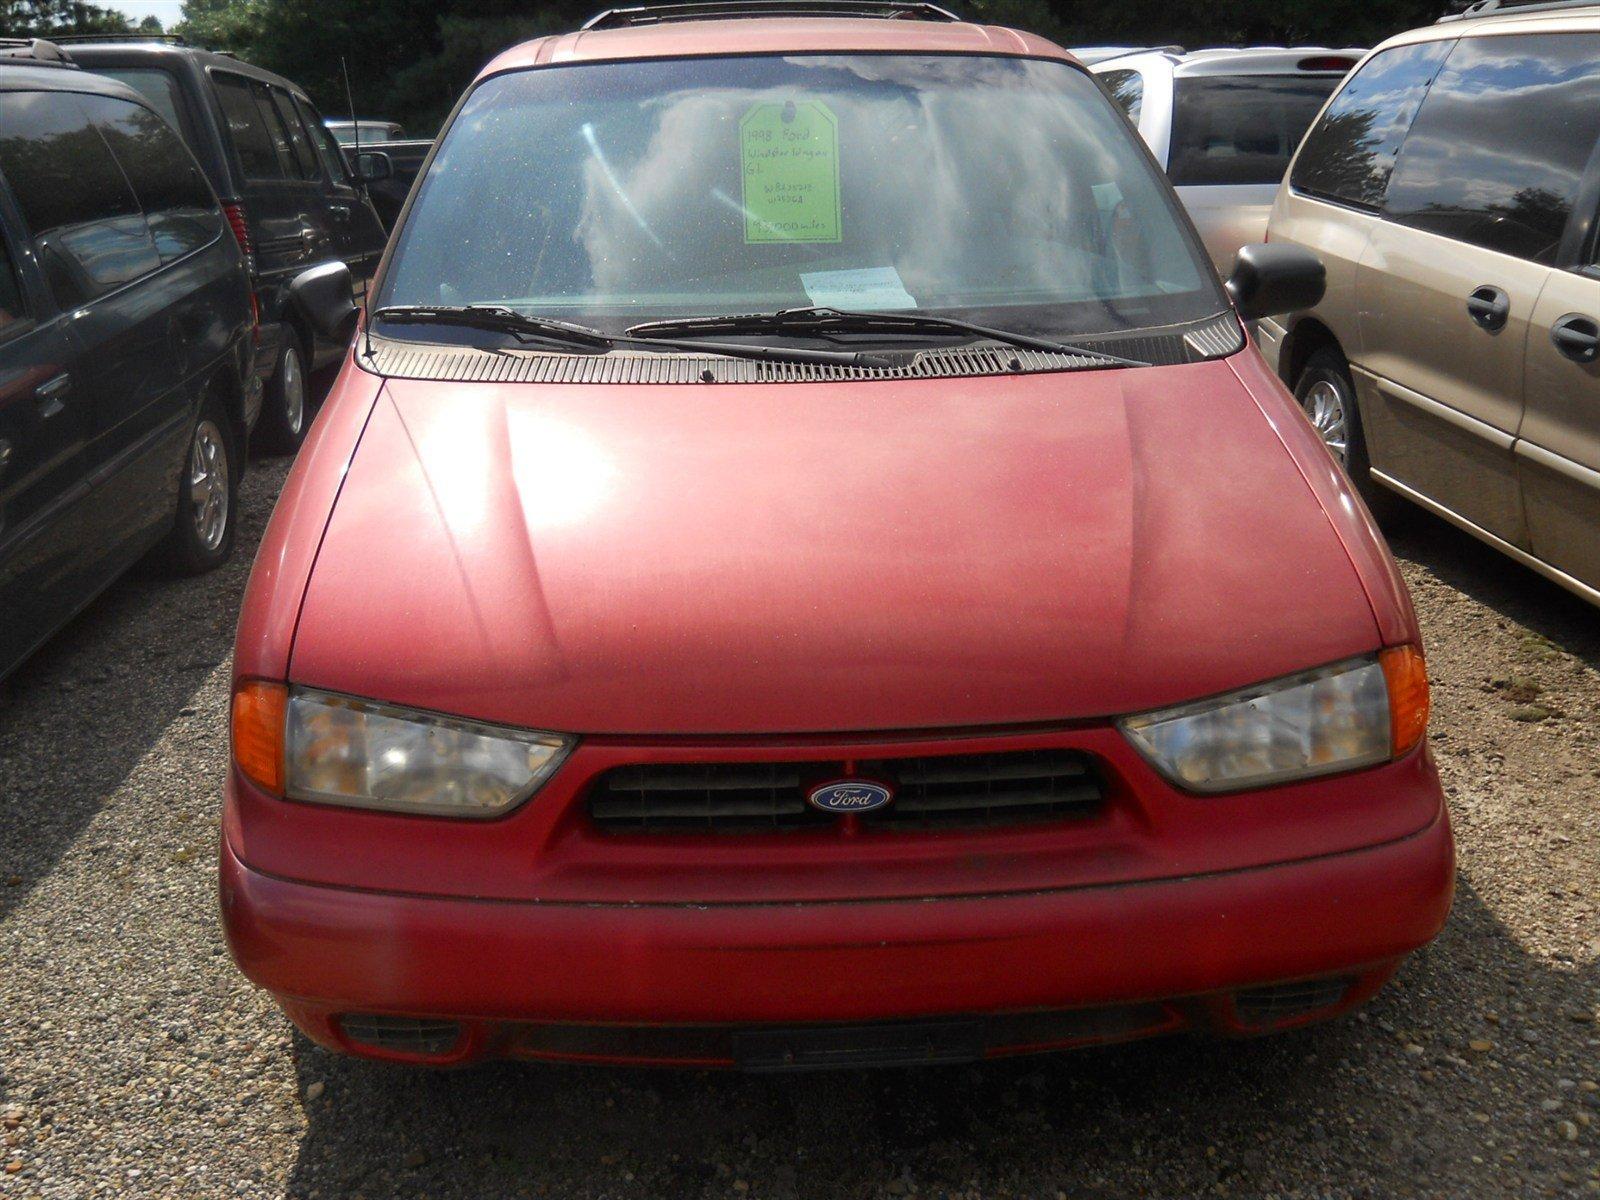 Used 1998 Ford Windstar LX with VIN 2FMDA5148WBA25213 for sale in Delavan, IL